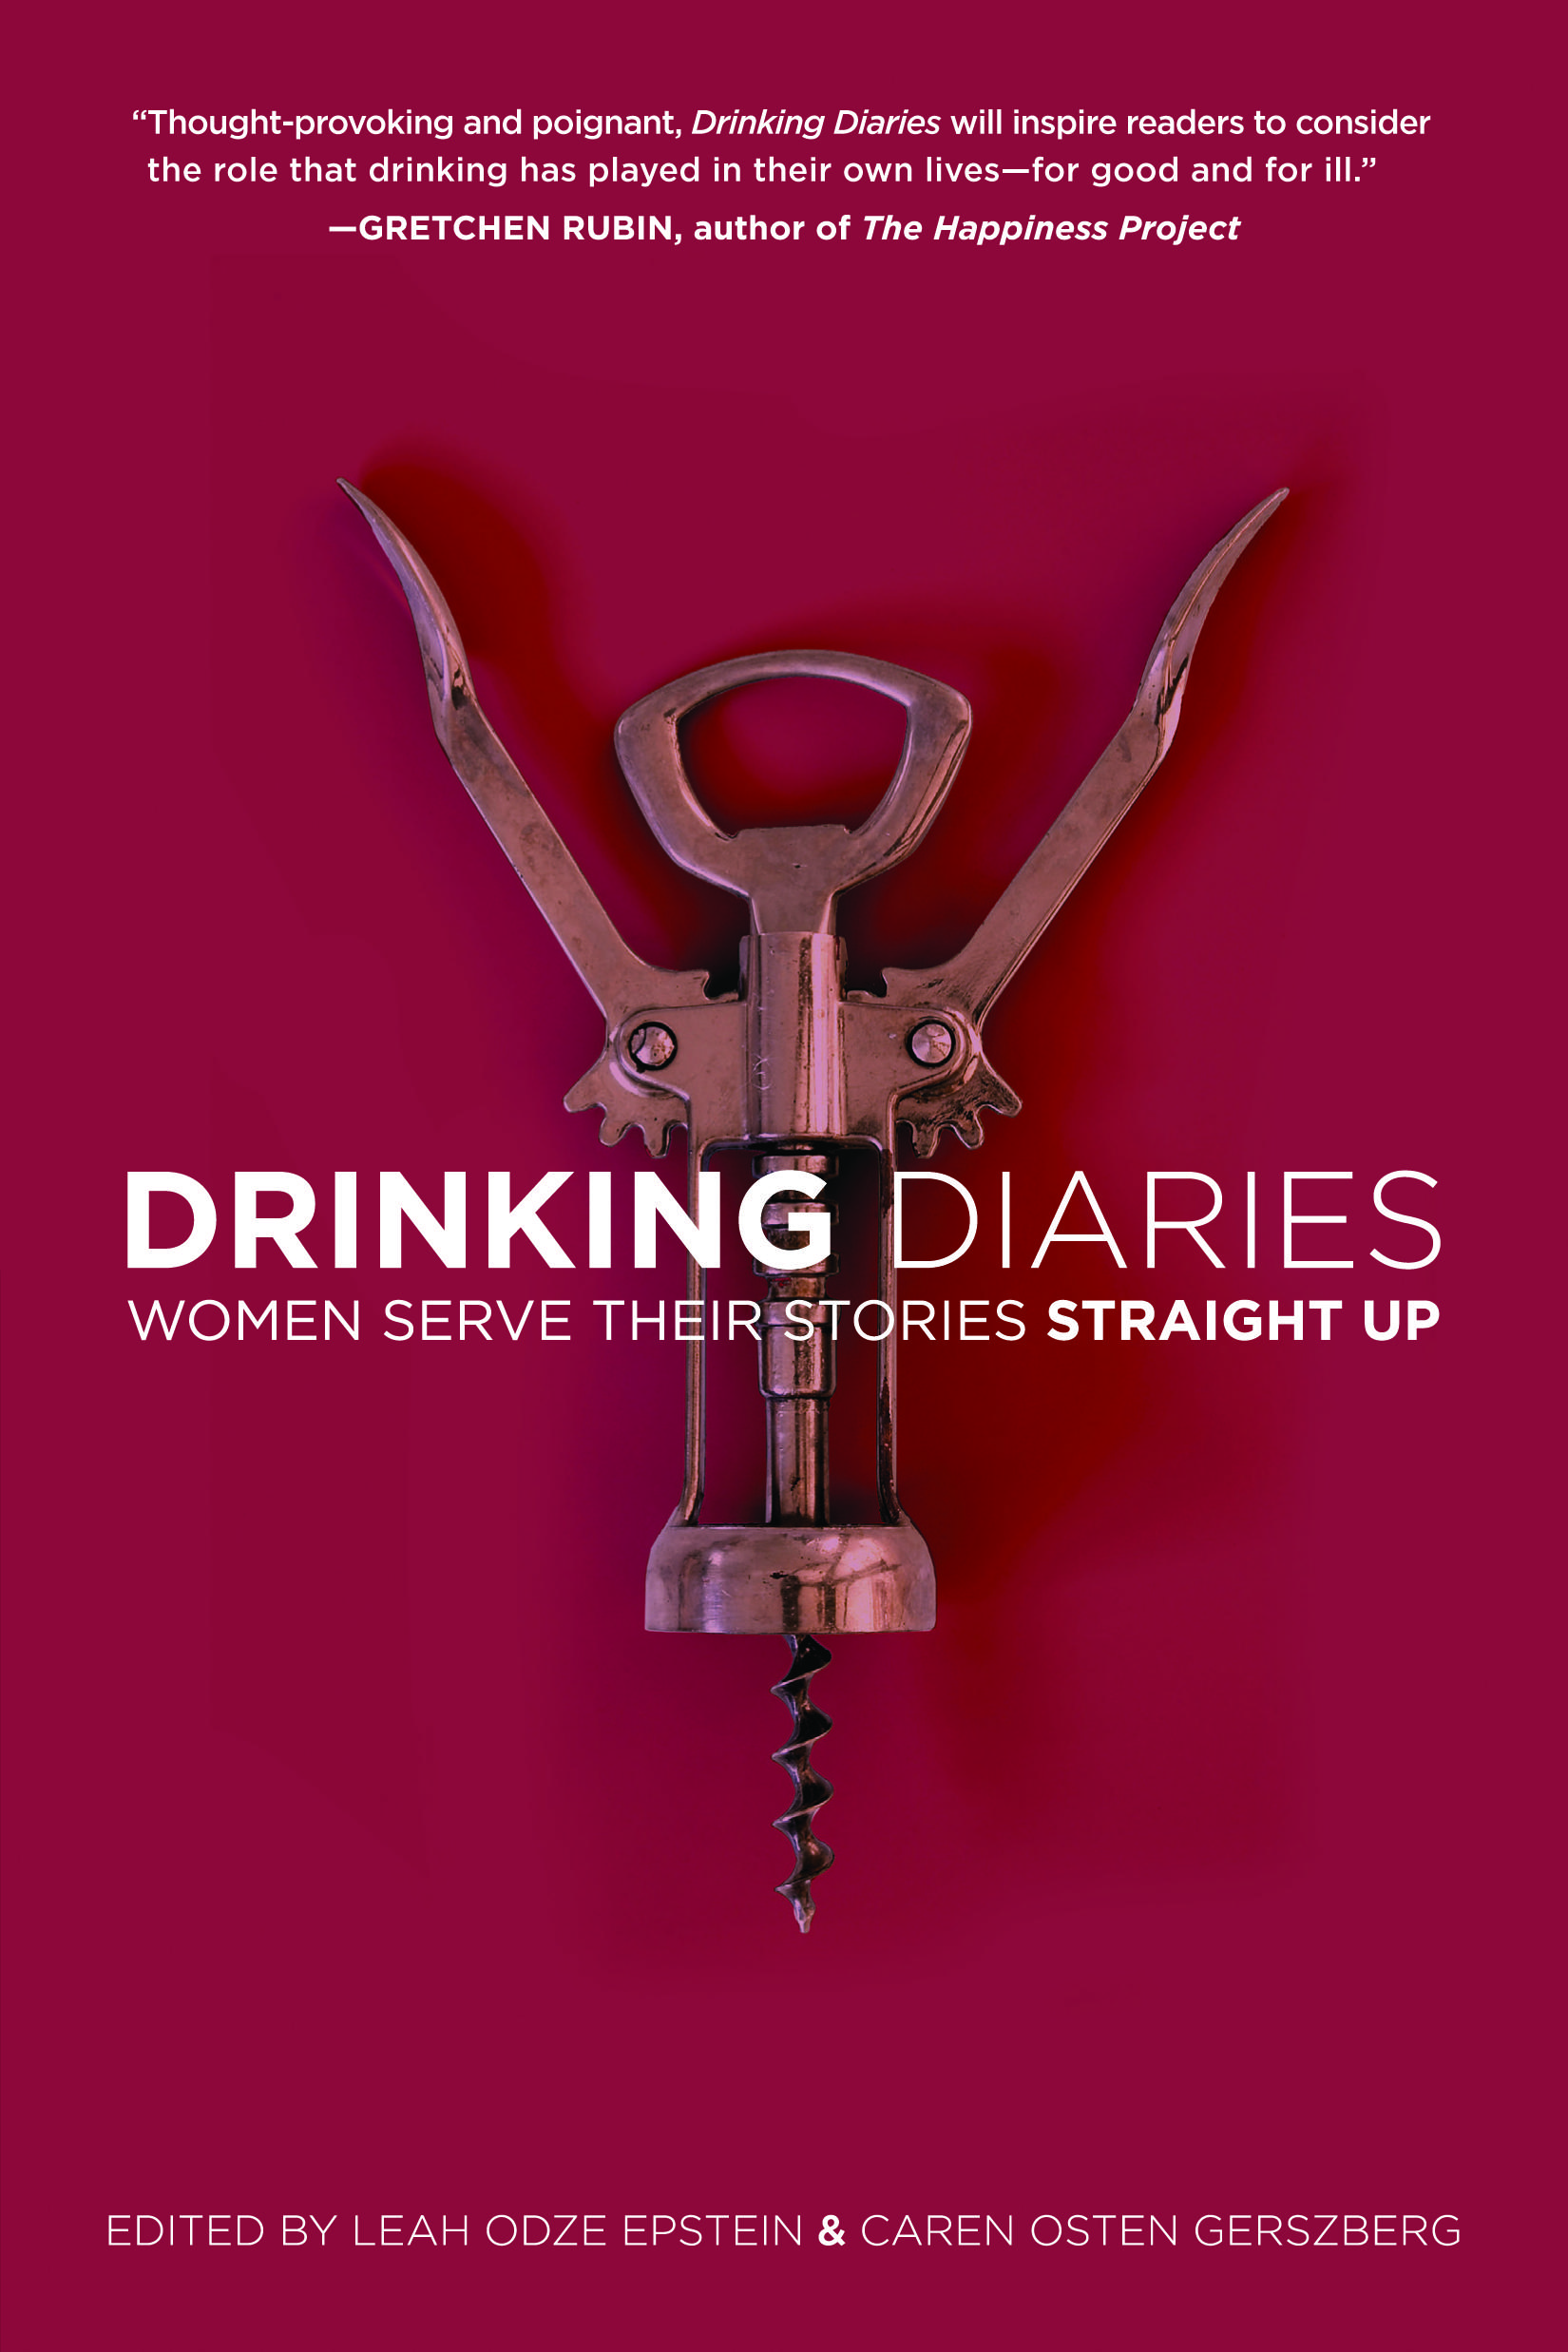 Book cover of Drinking Diaries by Caren Osten